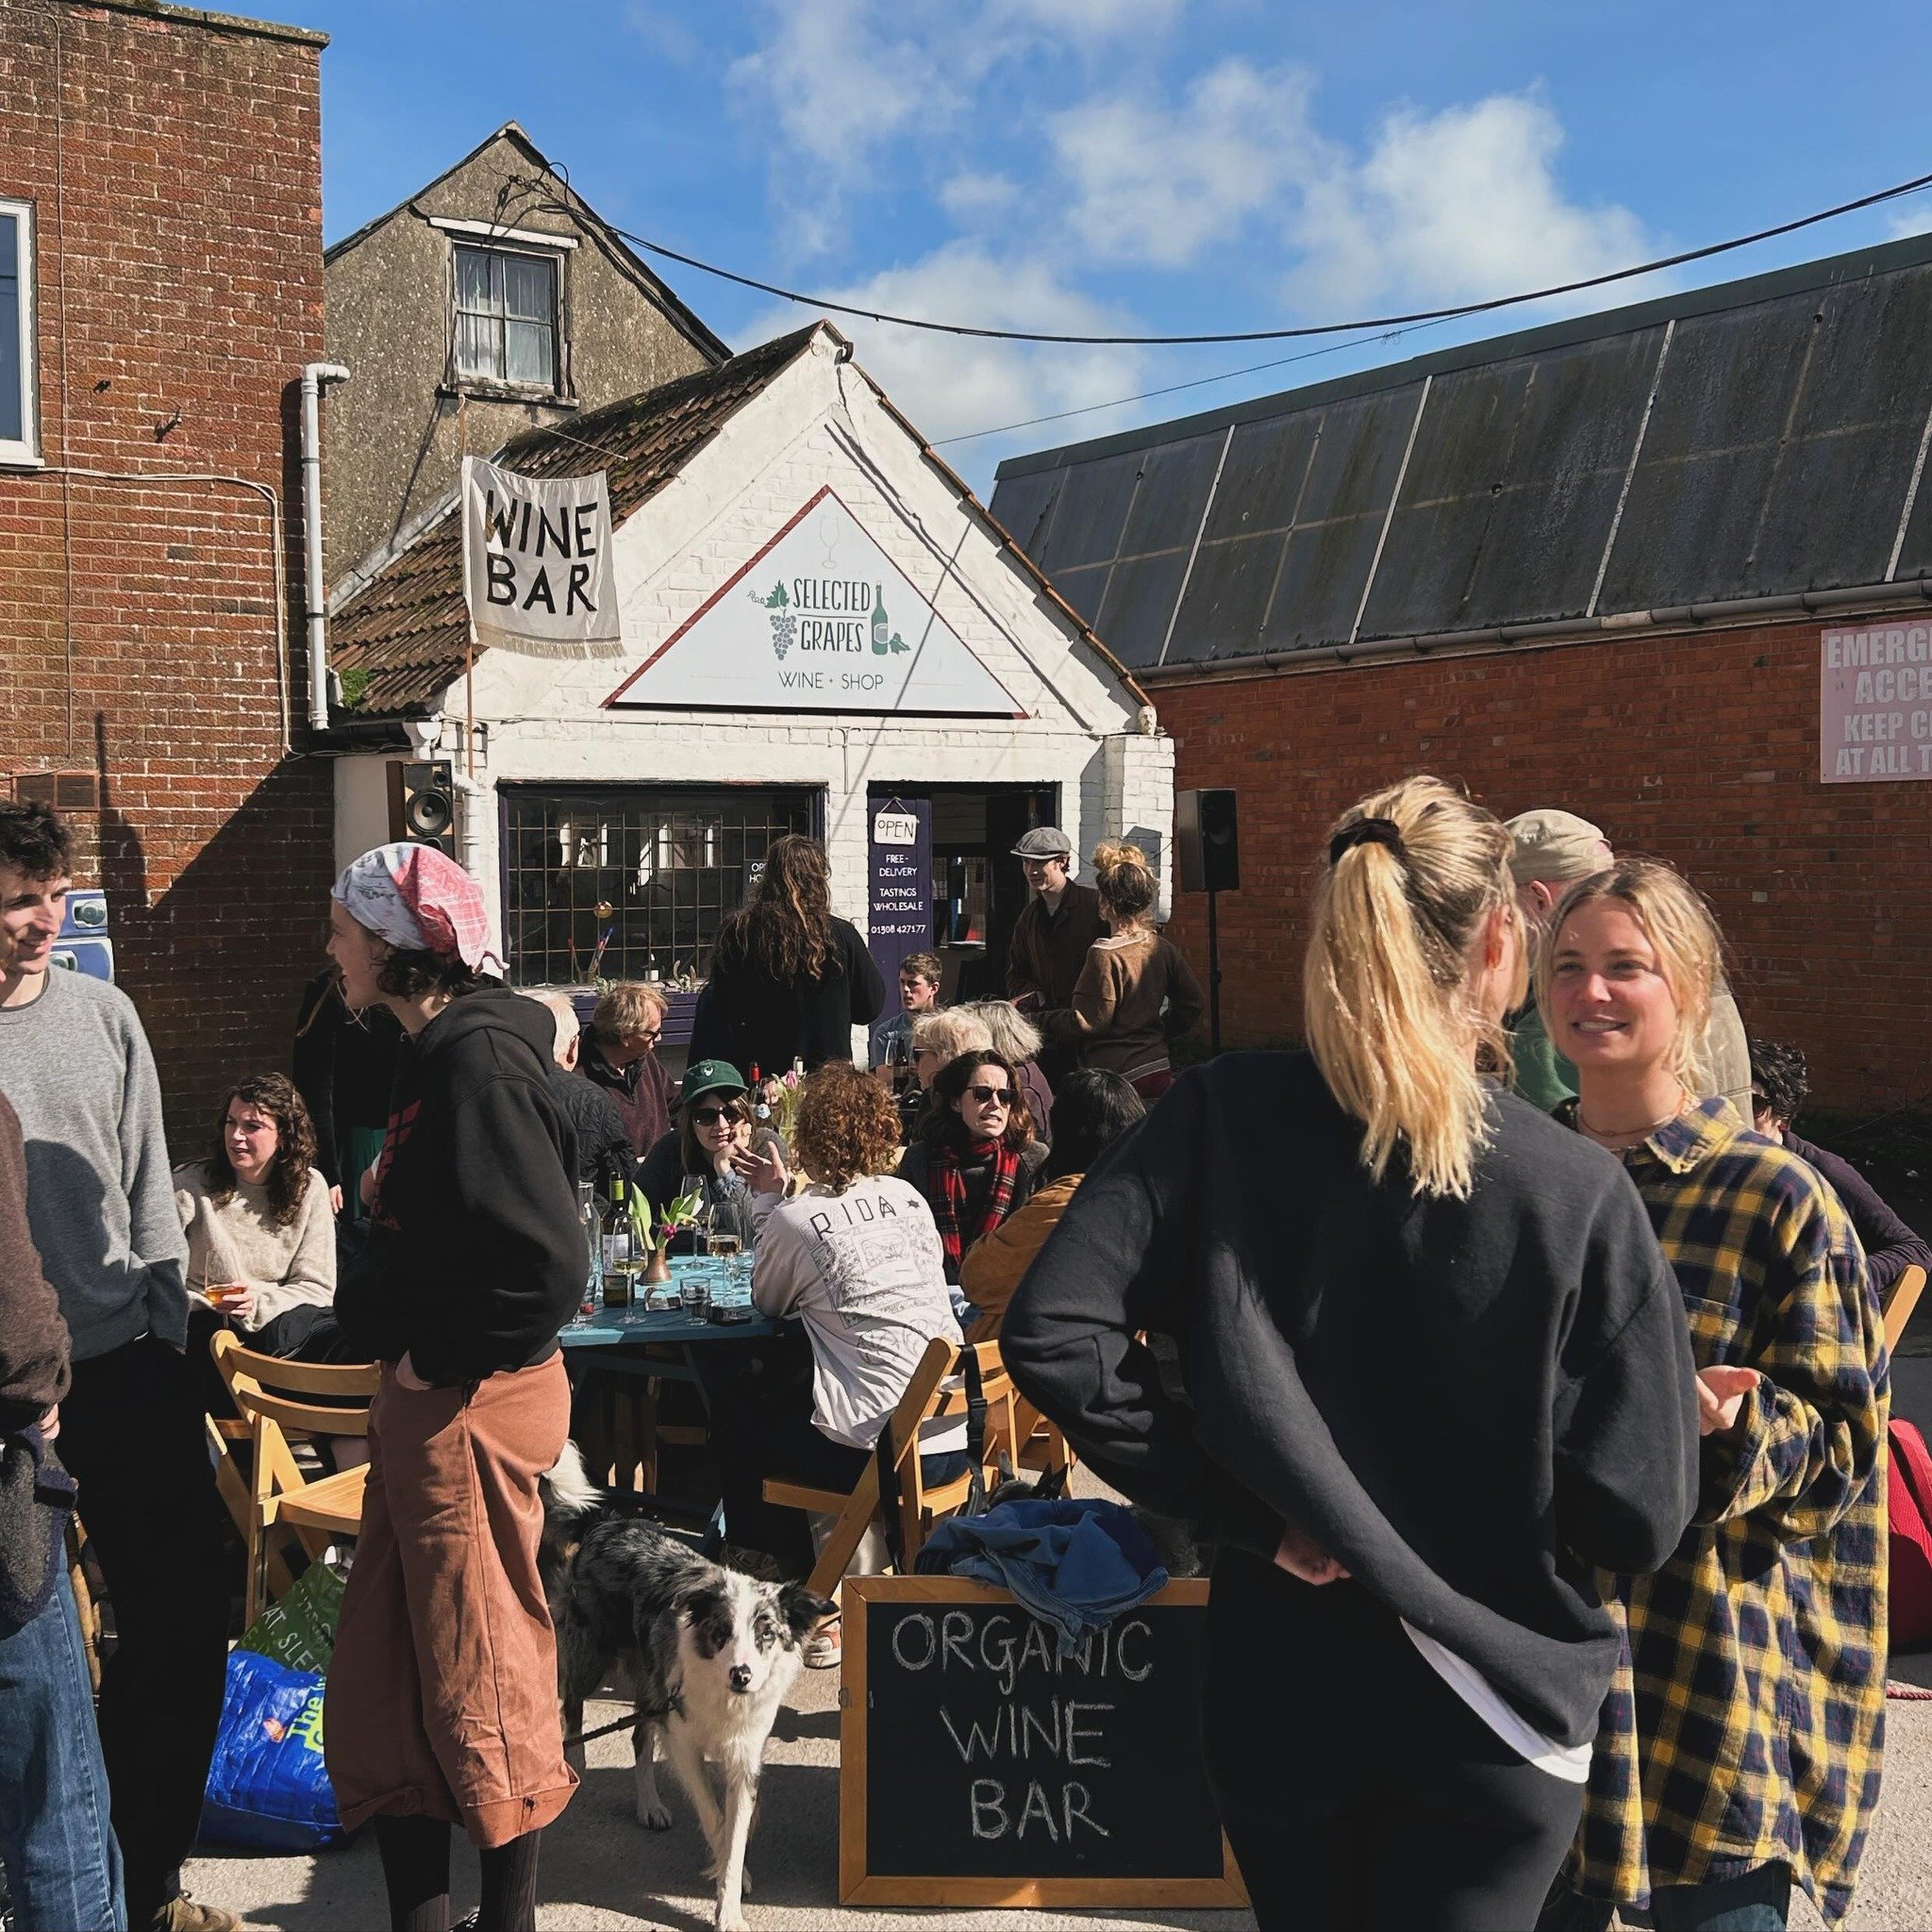 Wine bar season has finally arrived! ☀️ 🥂 The weather is looking good this Saturday so we will be serving real wine and craft beer from noon as usual, as well as taking care of all your bottle purchases. All this from the sunniest spot in Bridport (